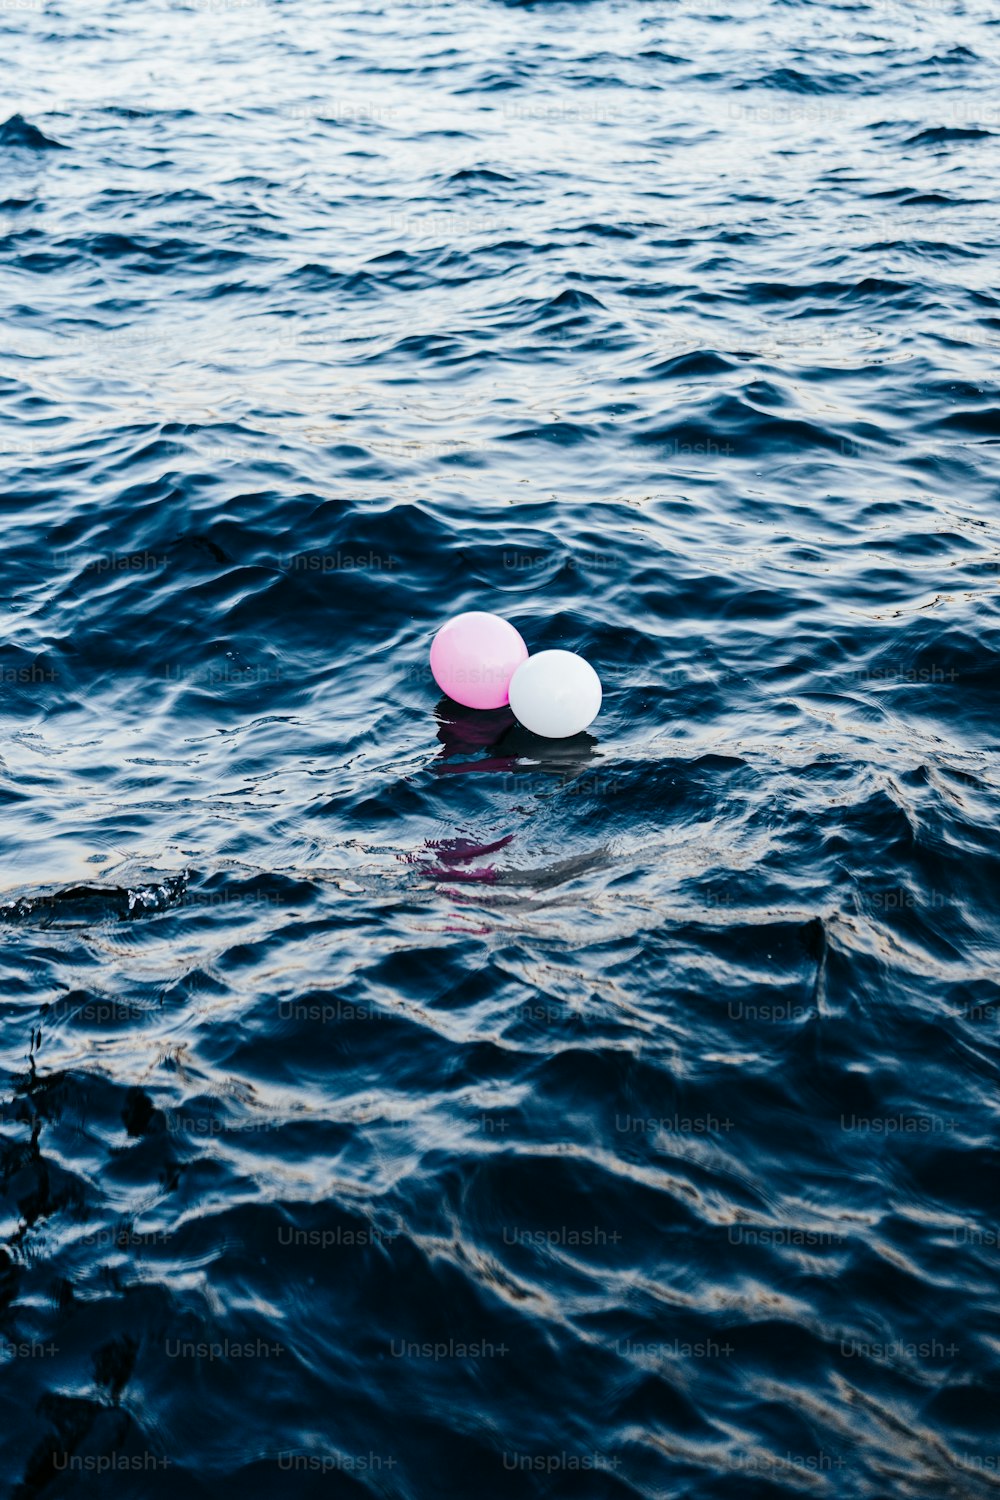 two frisbees floating on top of a body of water